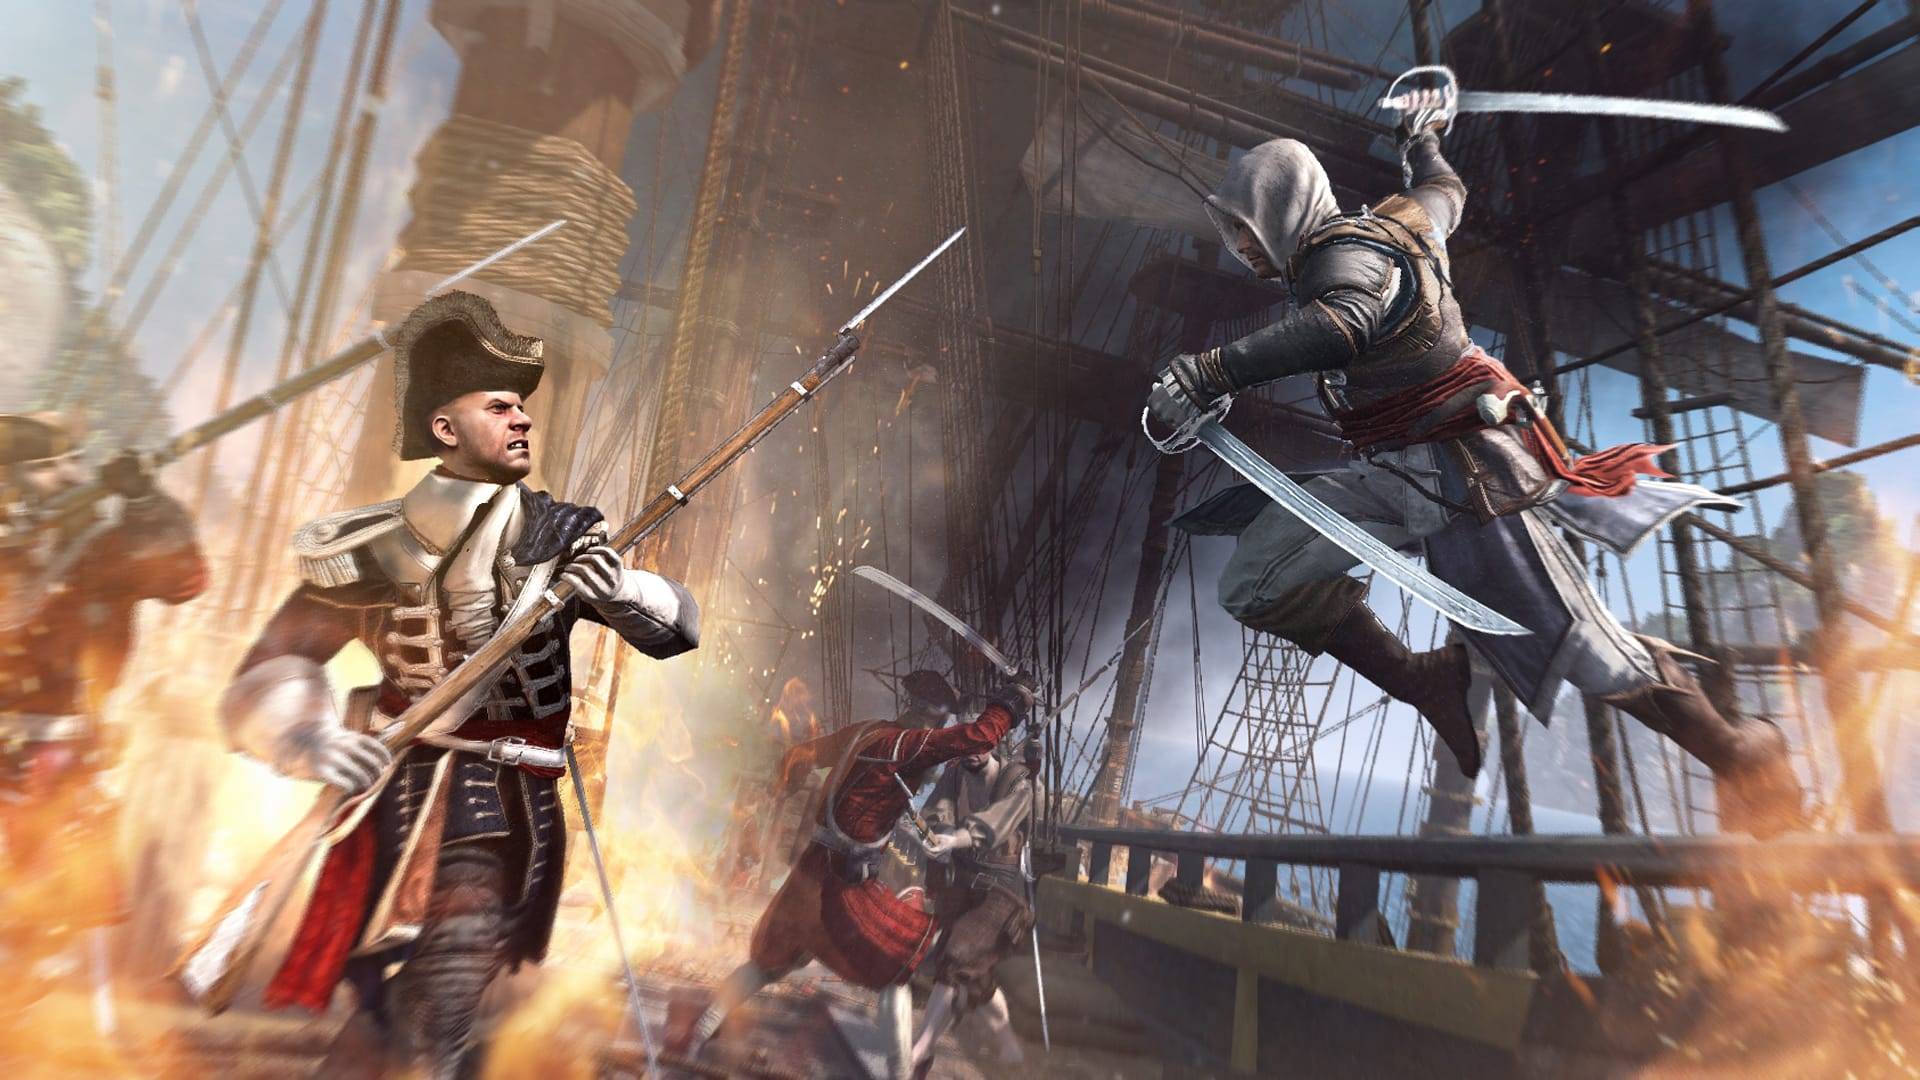 Best Pirate games: a clash of between naval forces and an assassin in Assassin